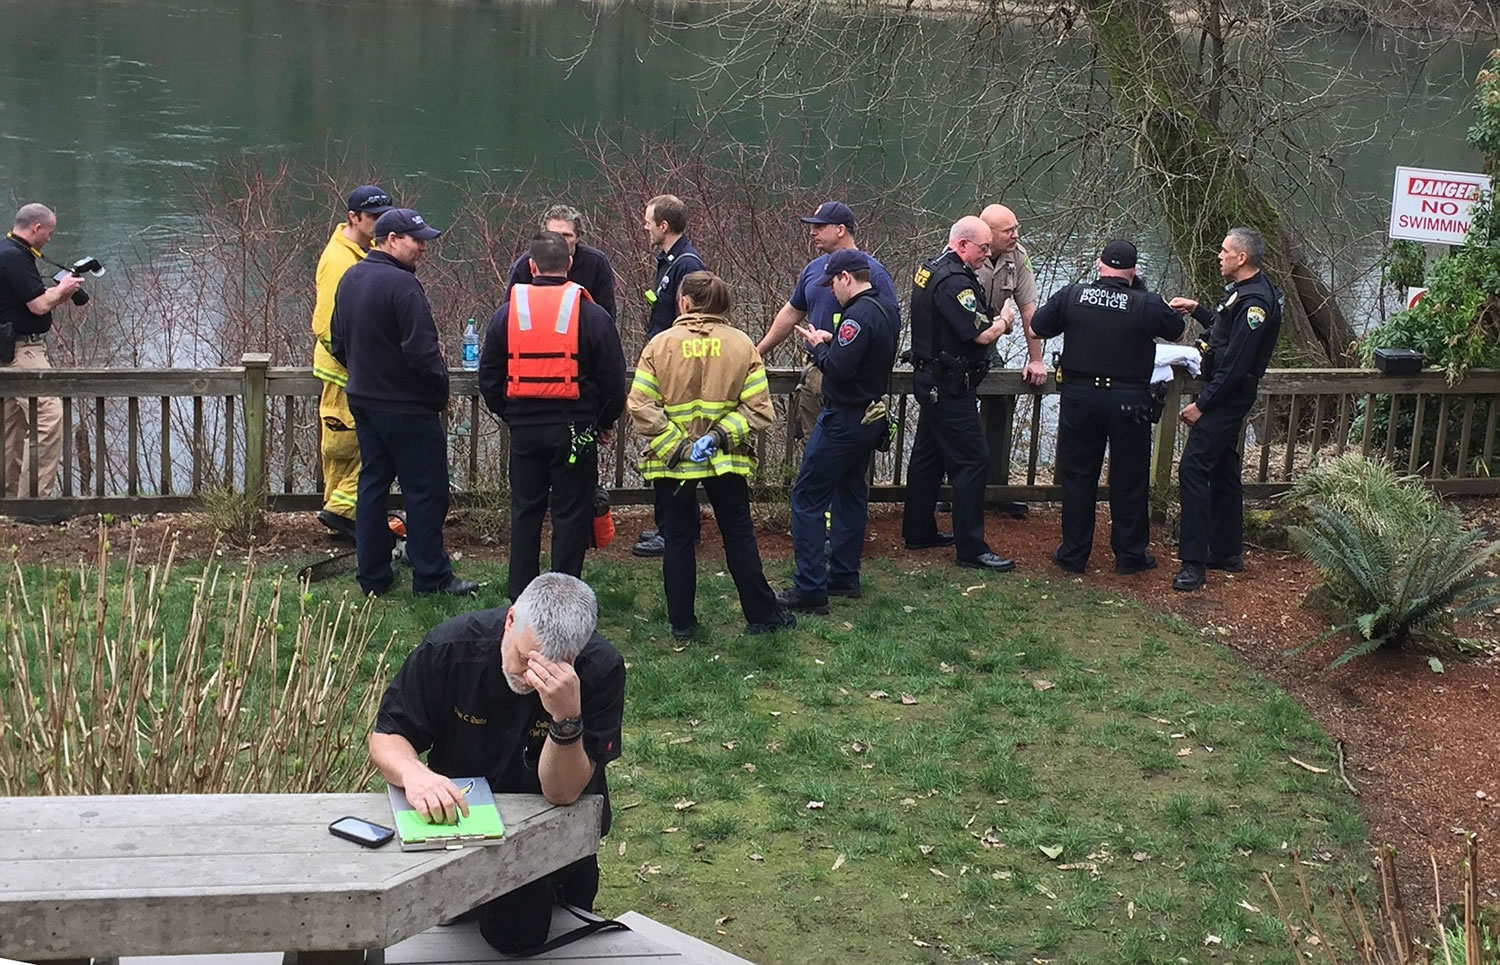 Firefighters and police are investigating after a body was found along the Lewis River in Woodland this afternoon.